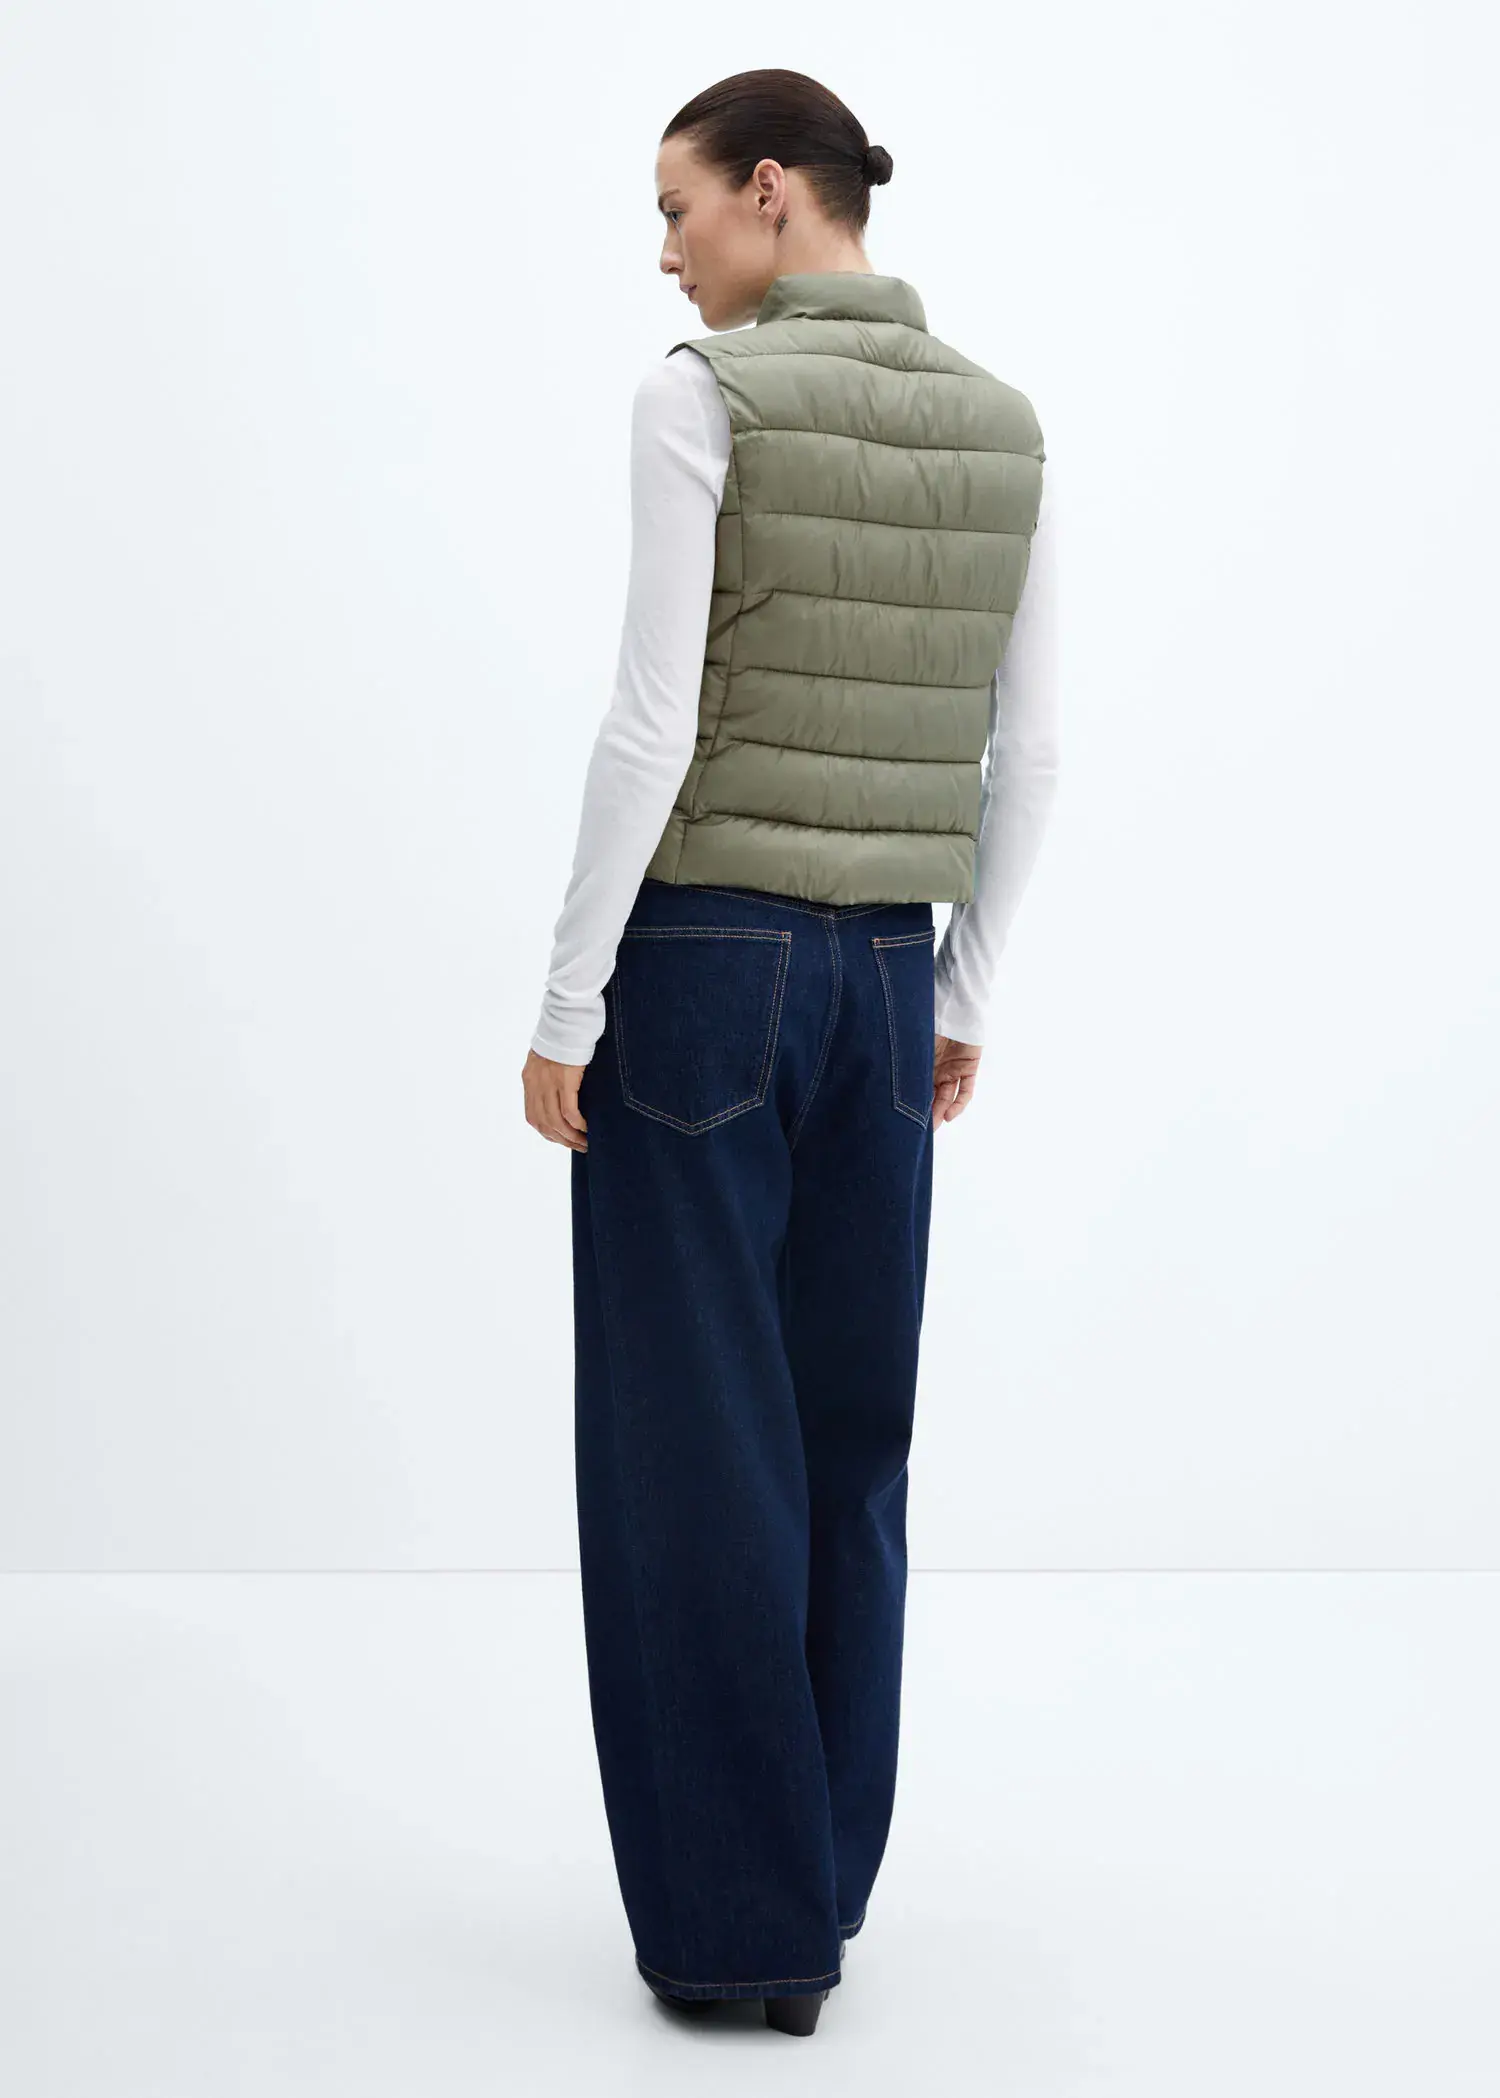 Mango Ultra-light quilted vest. 3